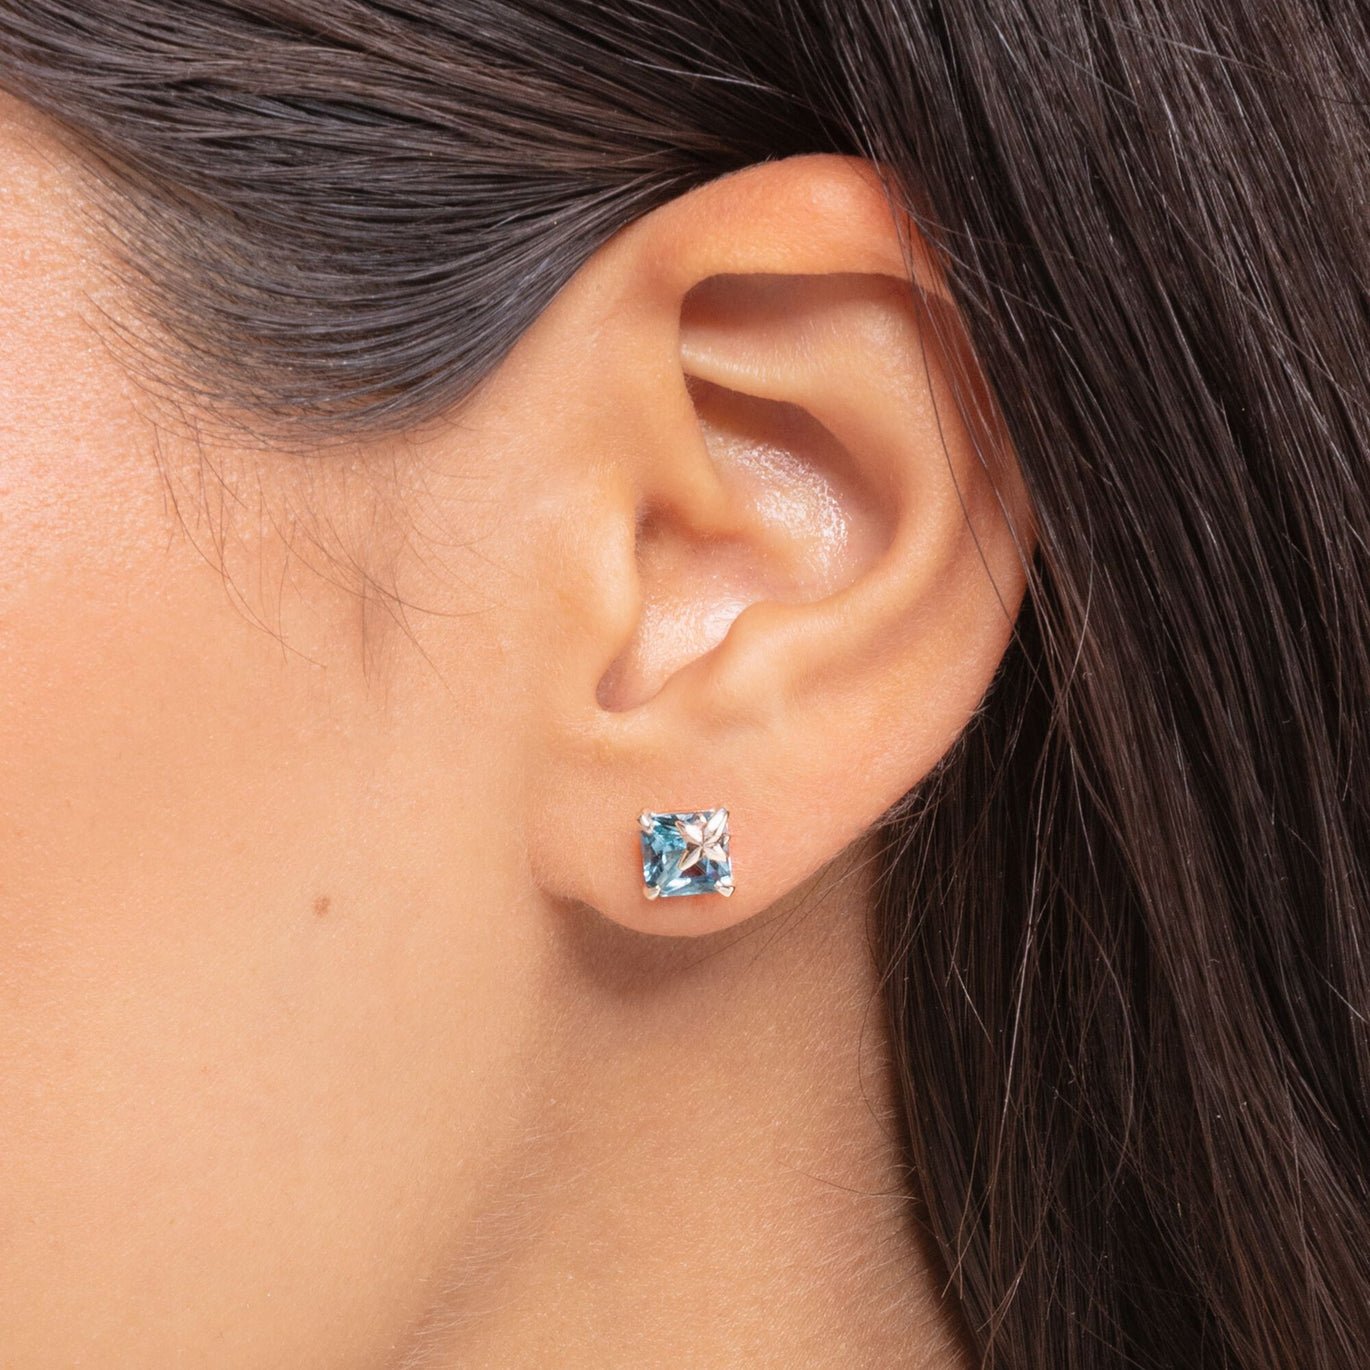 Thomas Sabo Blue Stone with Star Stud Earrings